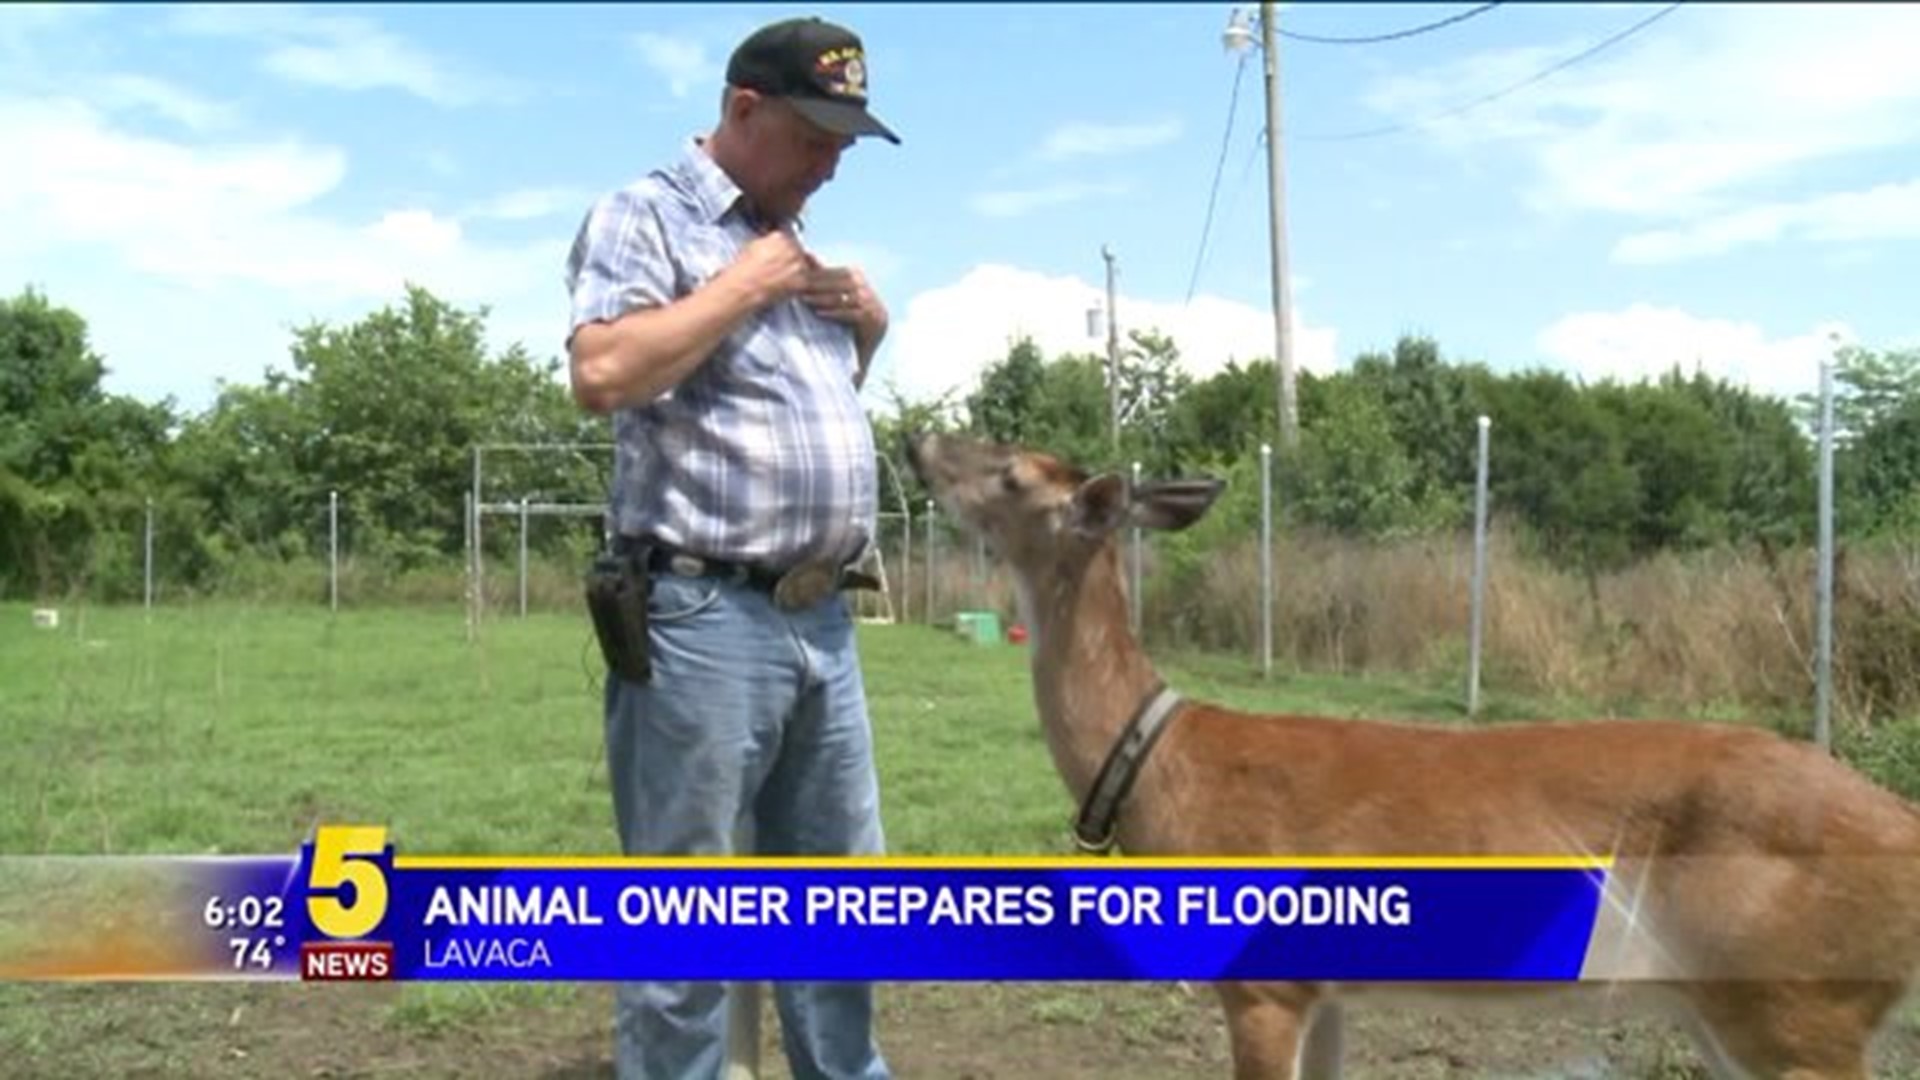 Wild Animal Rescuer Prepares For Potential Flooding In Lavaca